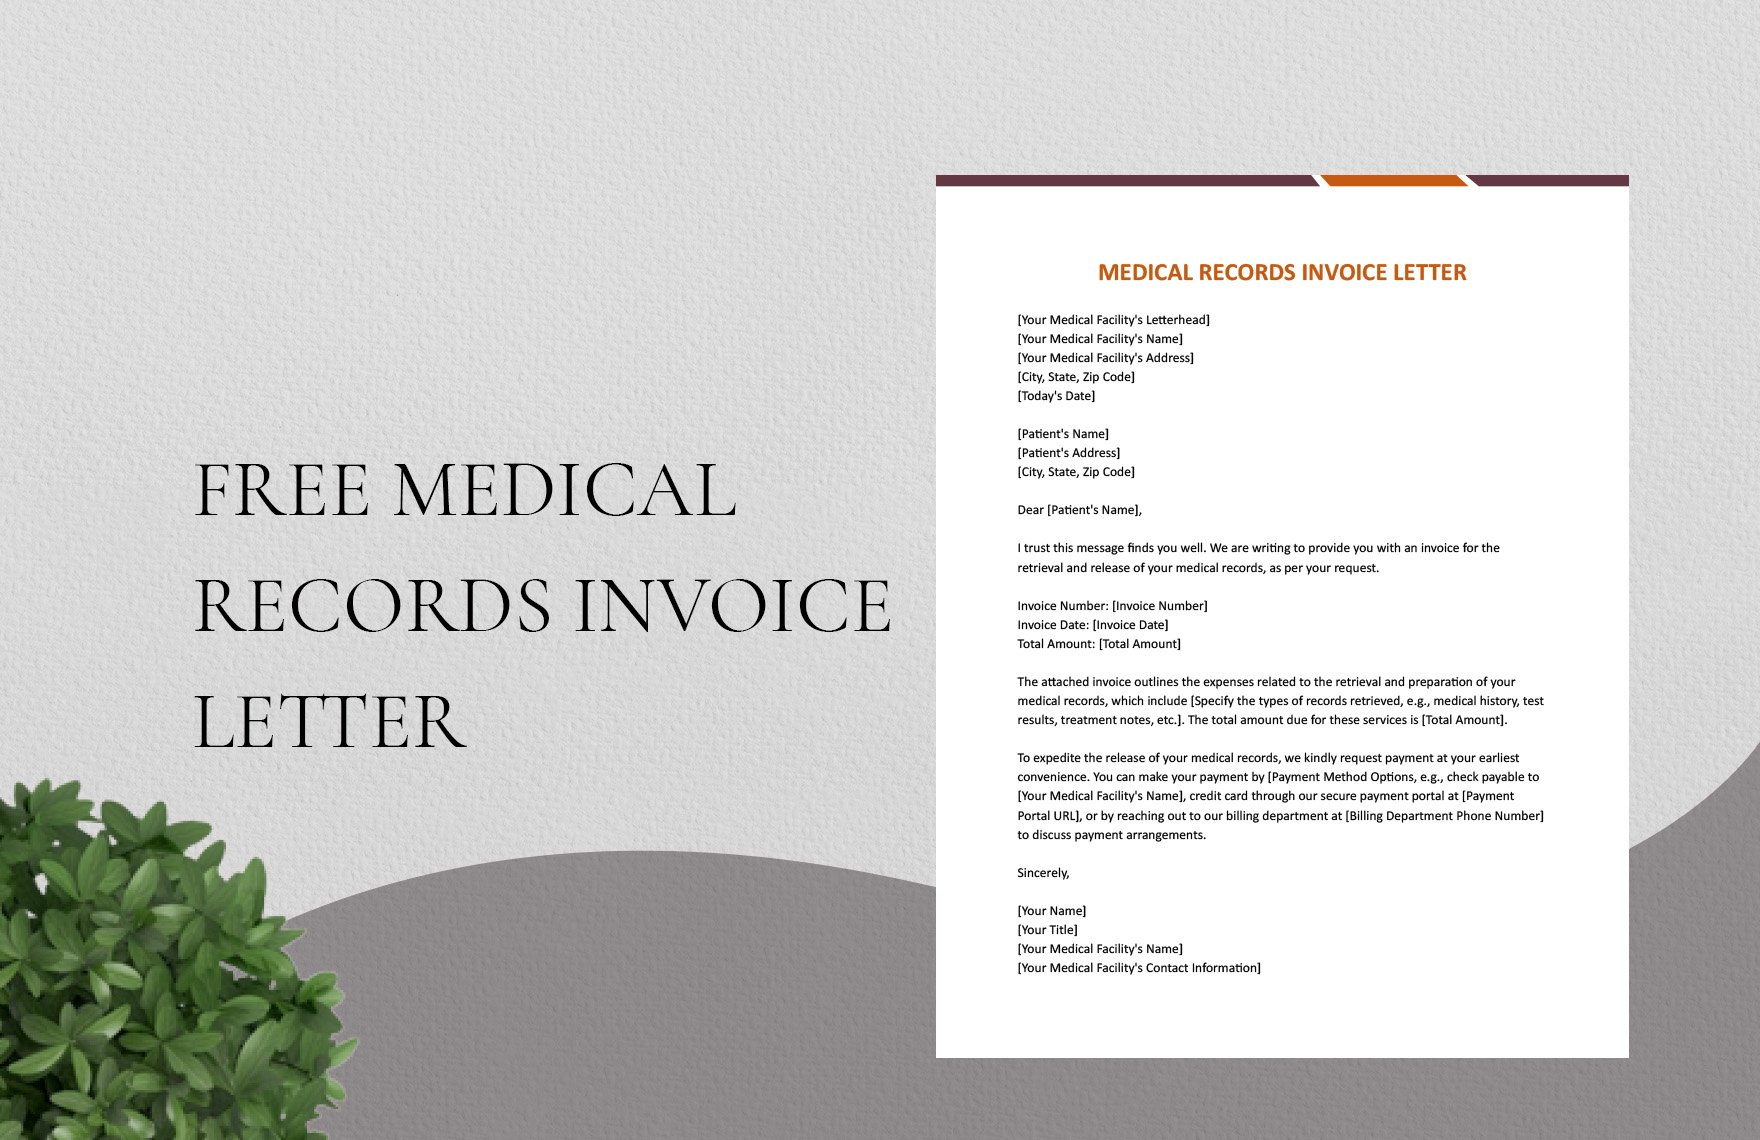 Medical Records Invoice Letter in Word, Google Docs